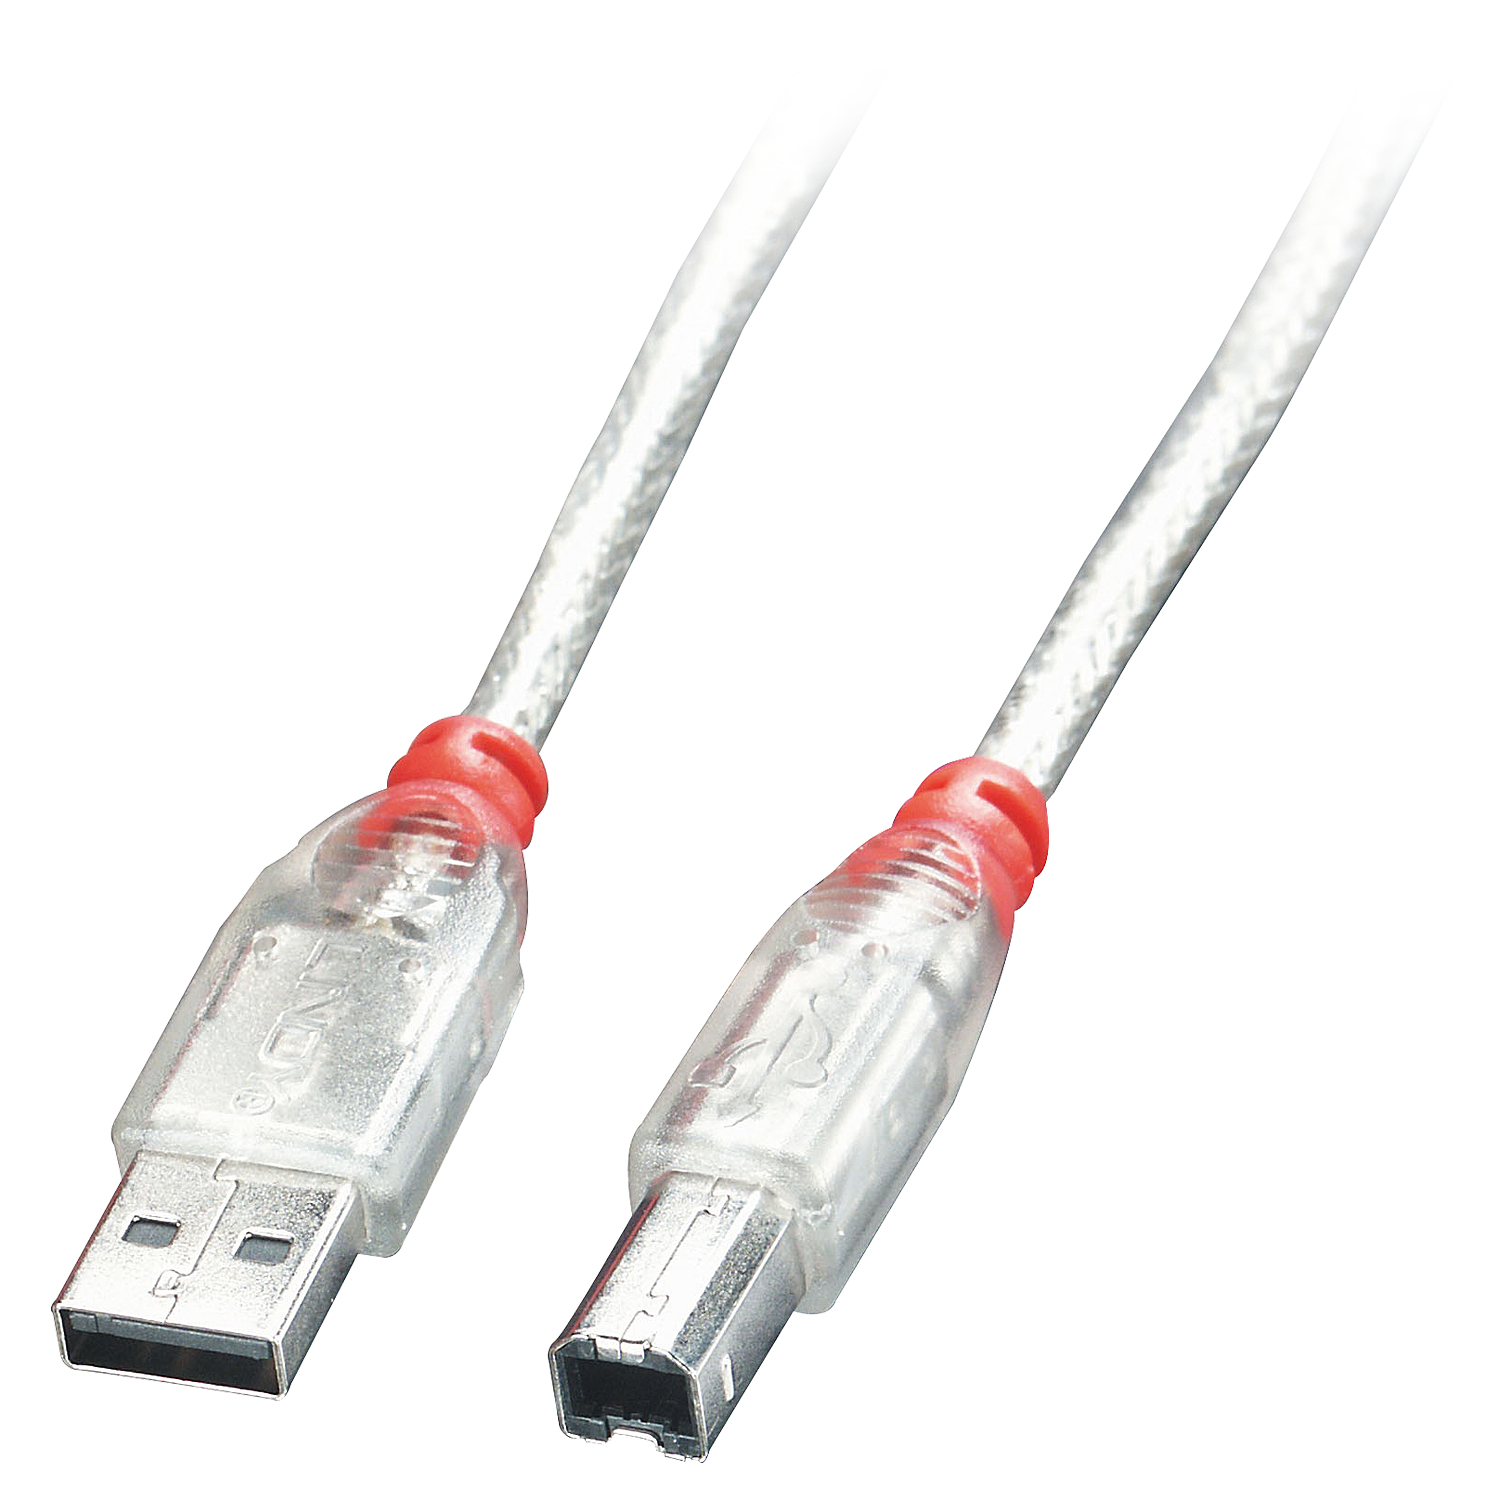 Lindy Cables & Adapters          0.2m Usb 2.0 Cable Transparent      Type A Male To Type B Male          41750